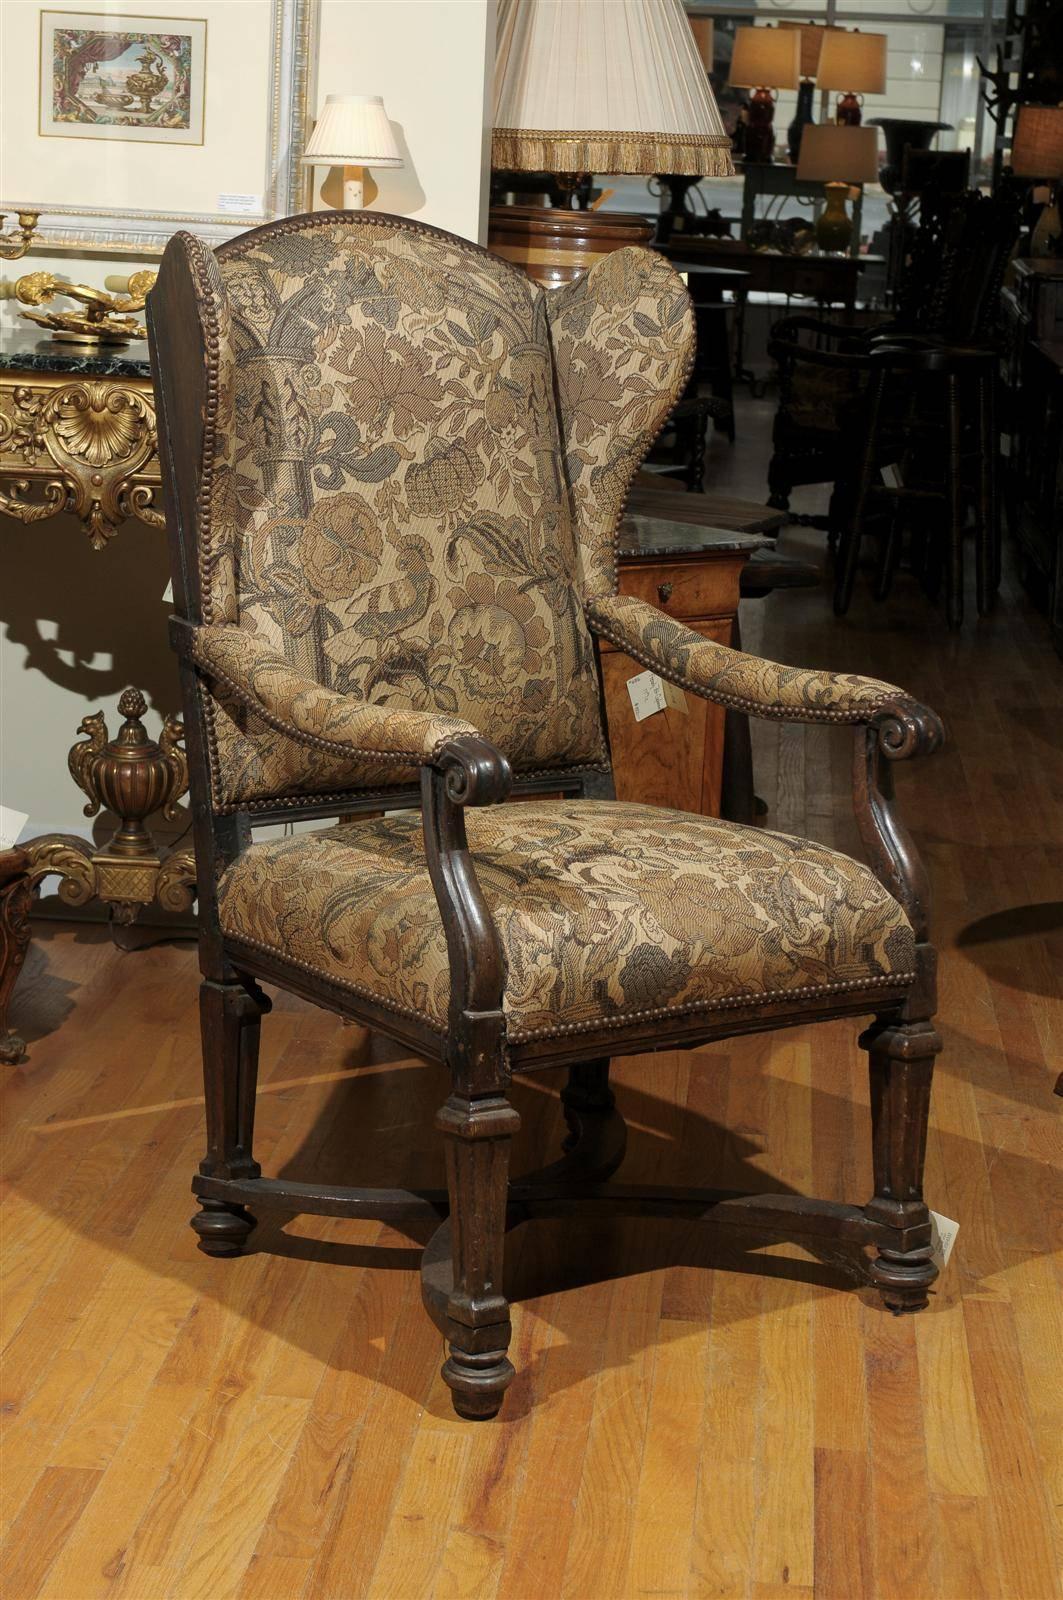 This is an 18th century wingback chair with new upholstery that reflects the time period. The wings on the back of the chair were meant to protect your face from drafts. They can be used in many rooms of your home and are very comfortable.